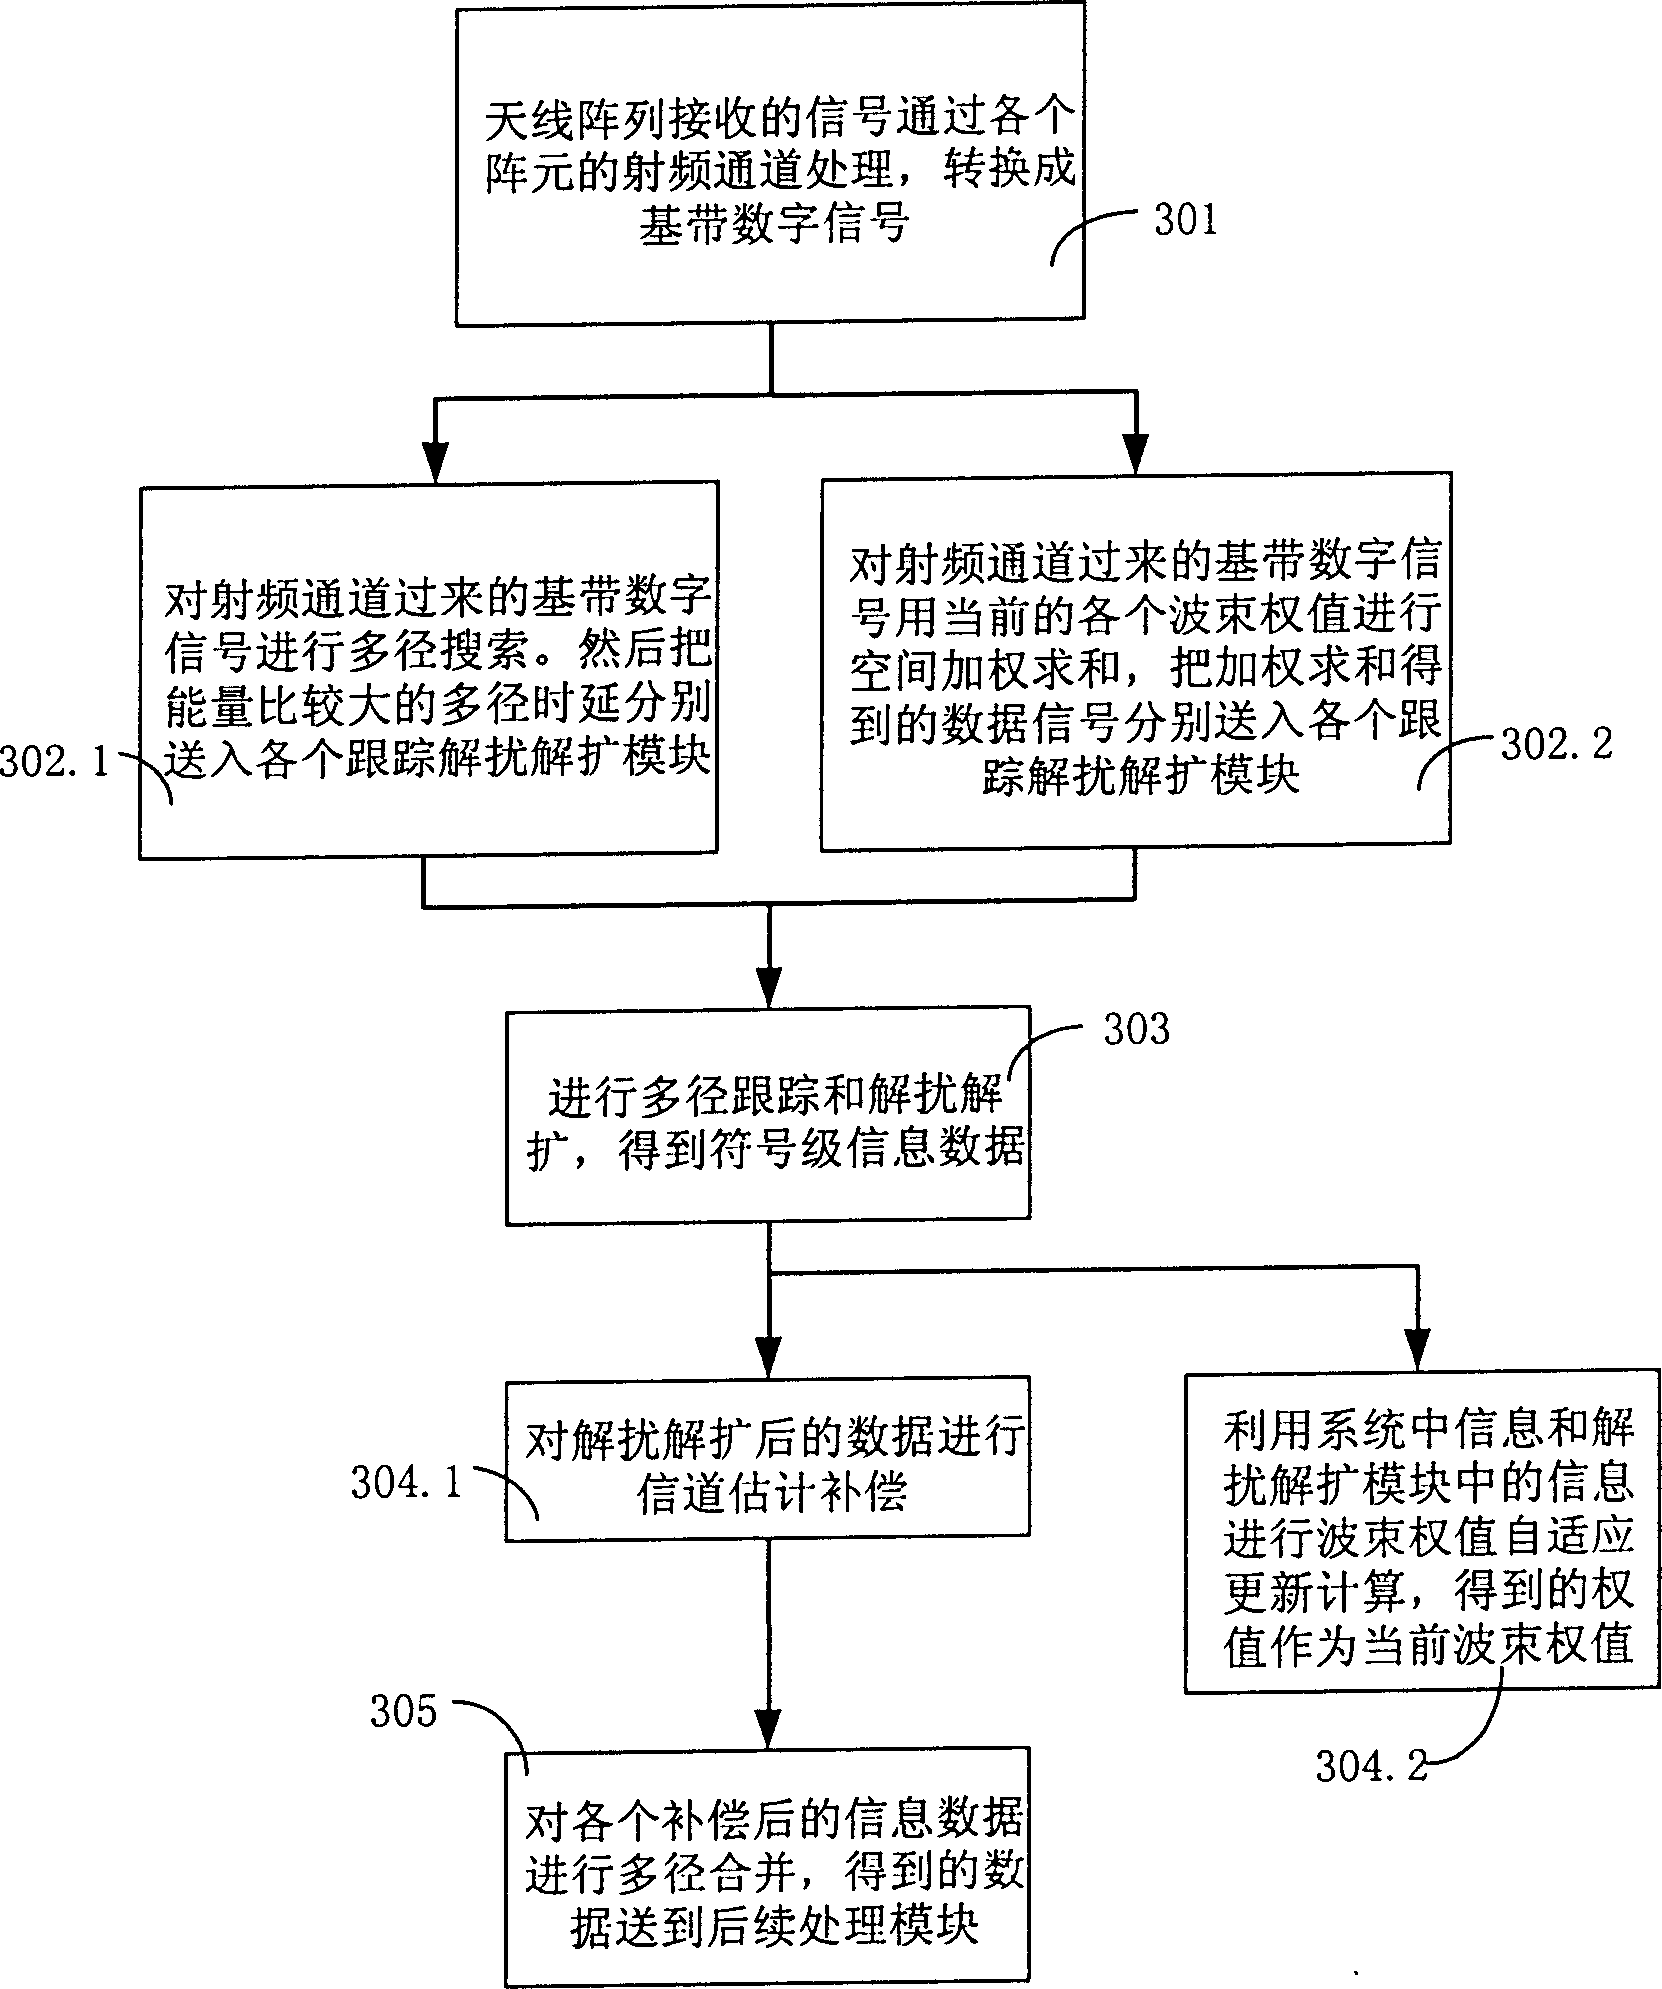 Intelligent receiving-transmitting diversity method and device for antenna